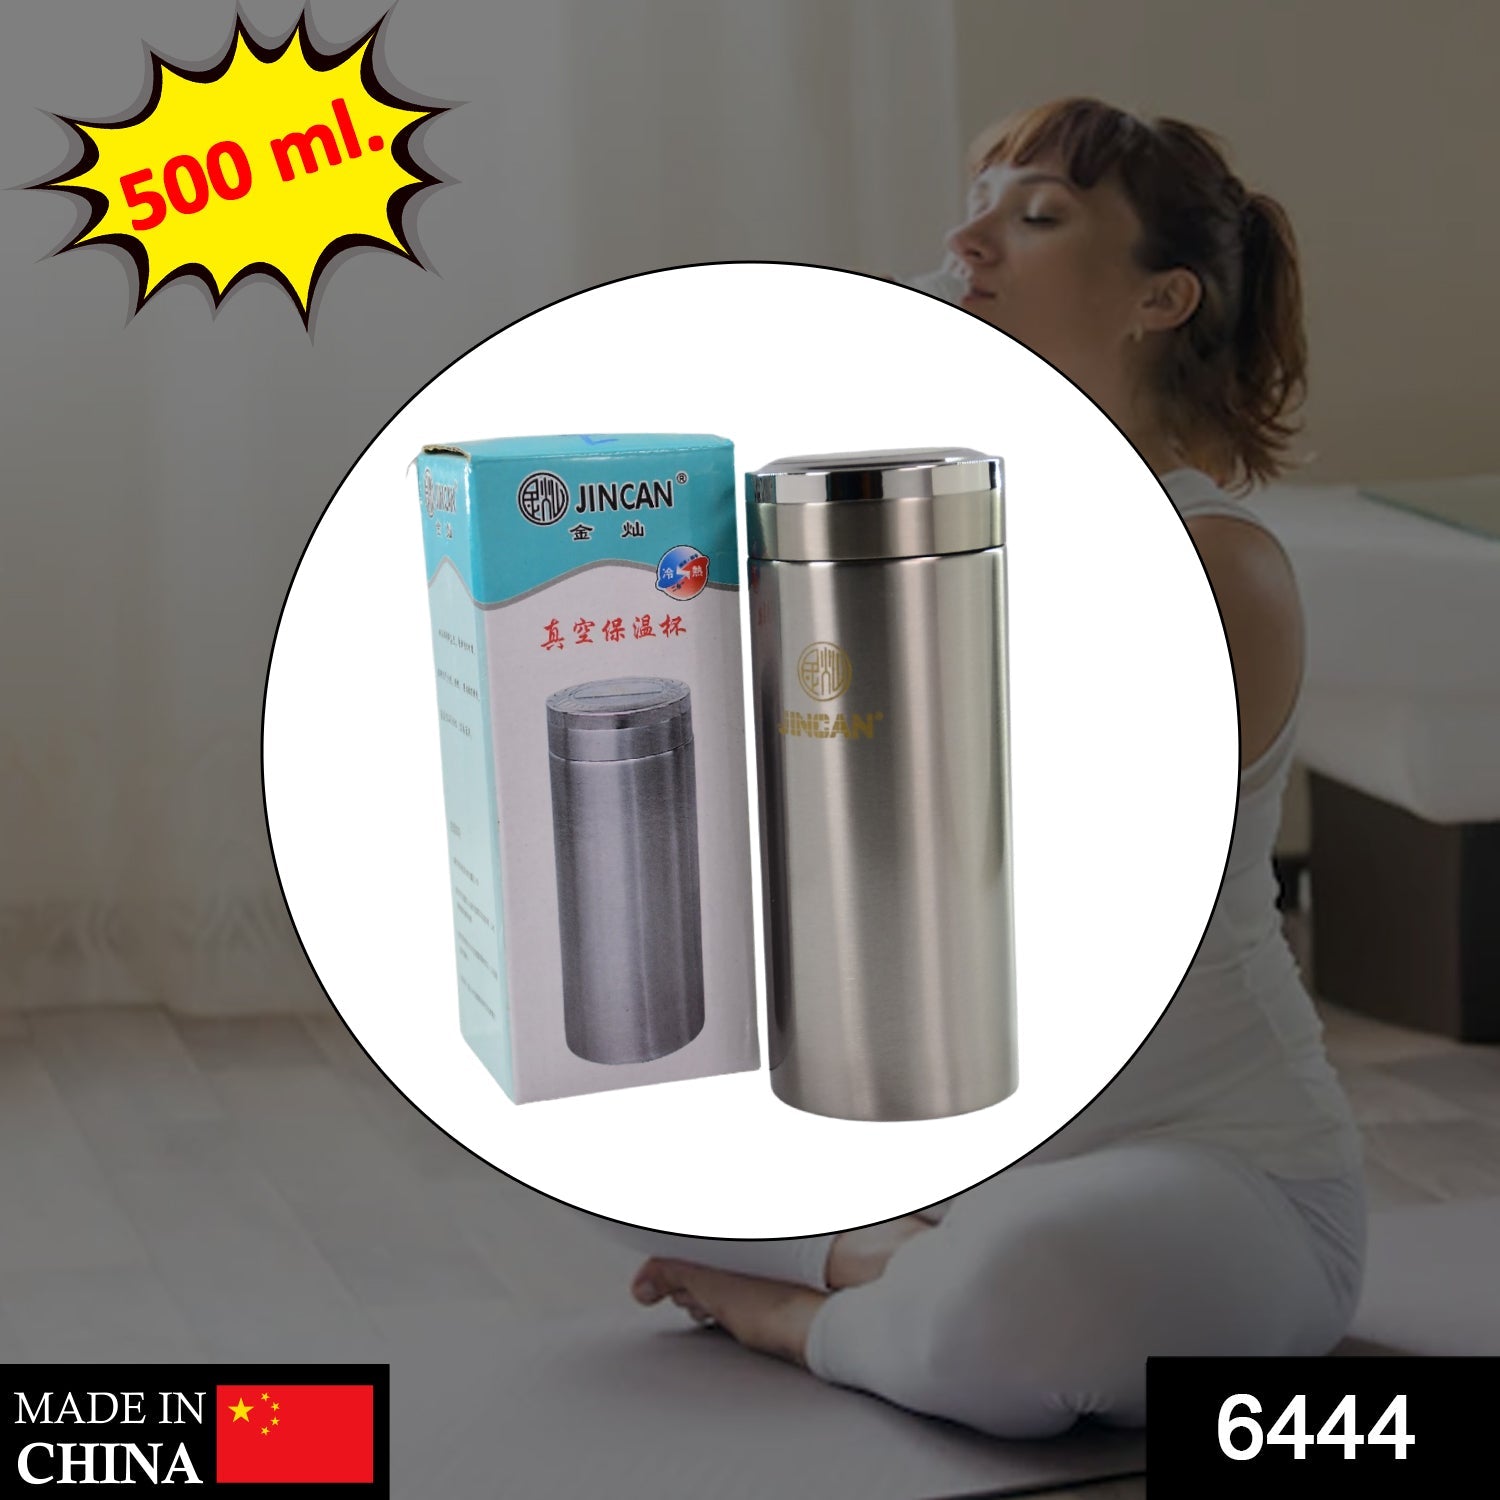 6444 500ML STAINLESS STEEL WATER BOTTLE FOR MEN WOMEN KIDS | THERMOS FLASK | REUSABLE LEAK-PROOF THERMOS STEEL FOR HOME OFFICE GYM FRIDGE TRAVELLING DeoDap